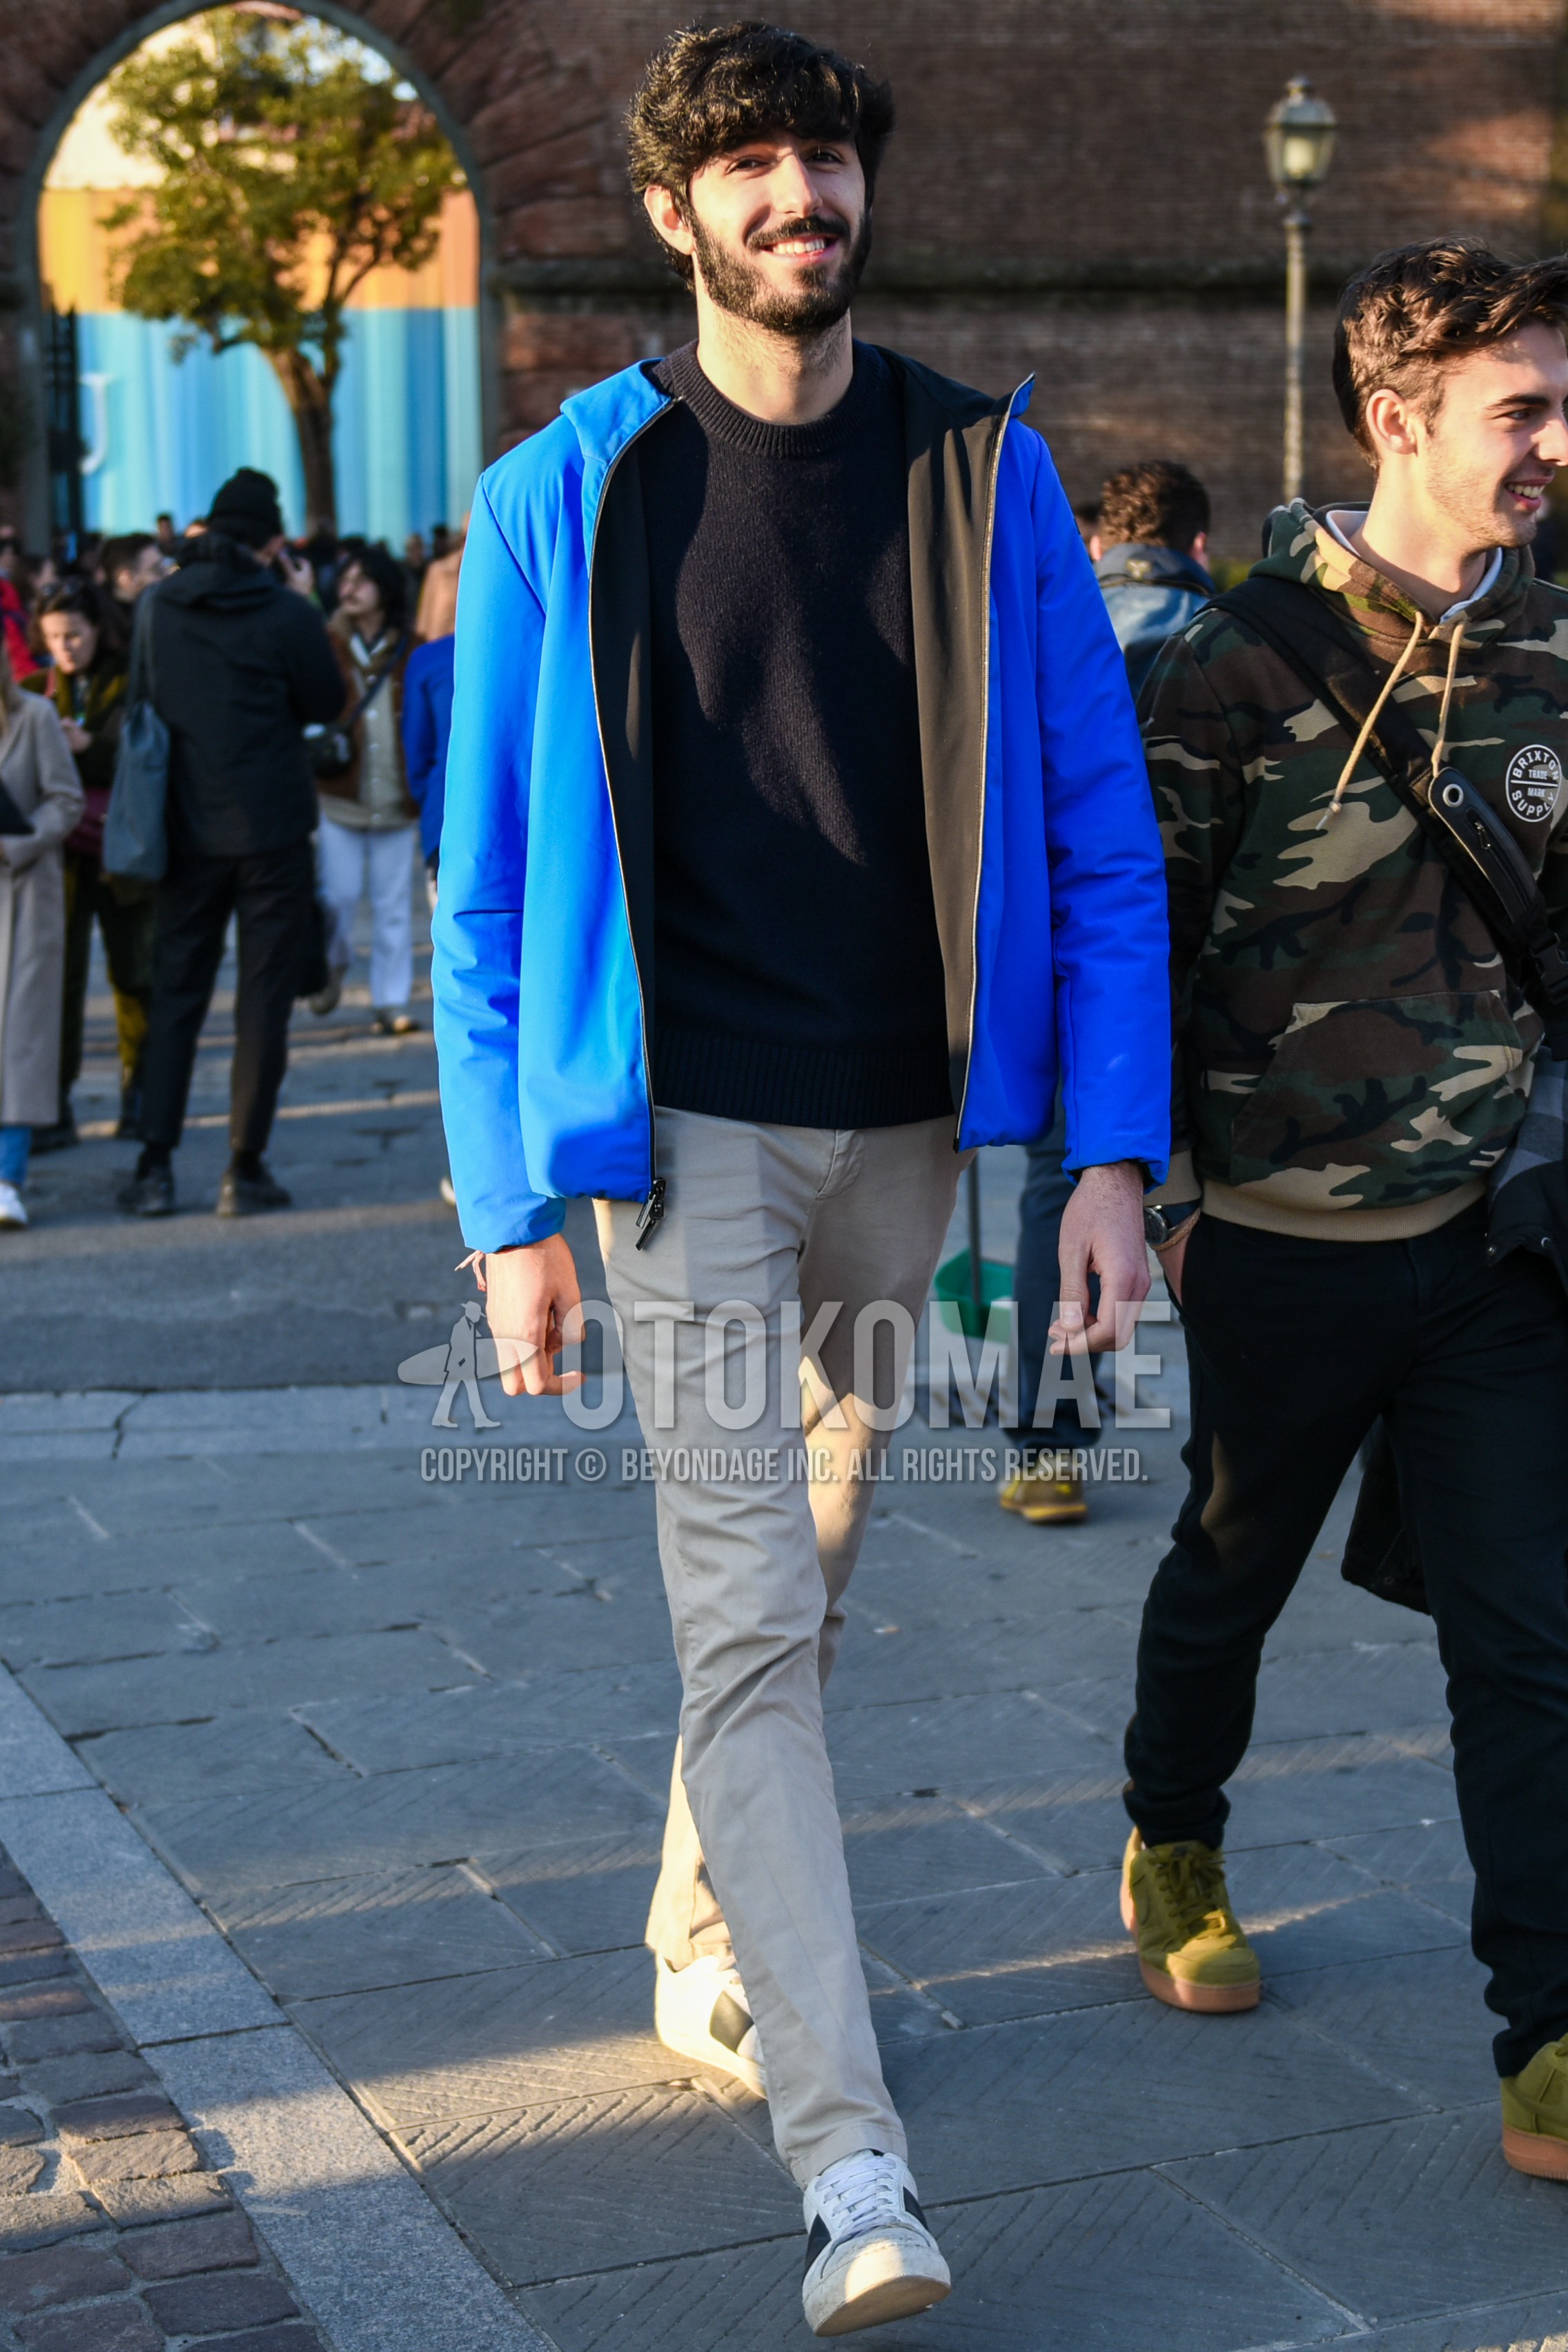 Men's autumn winter outfit with blue plain hooded coat, black plain sweater, beige plain chinos, white low-cut sneakers.